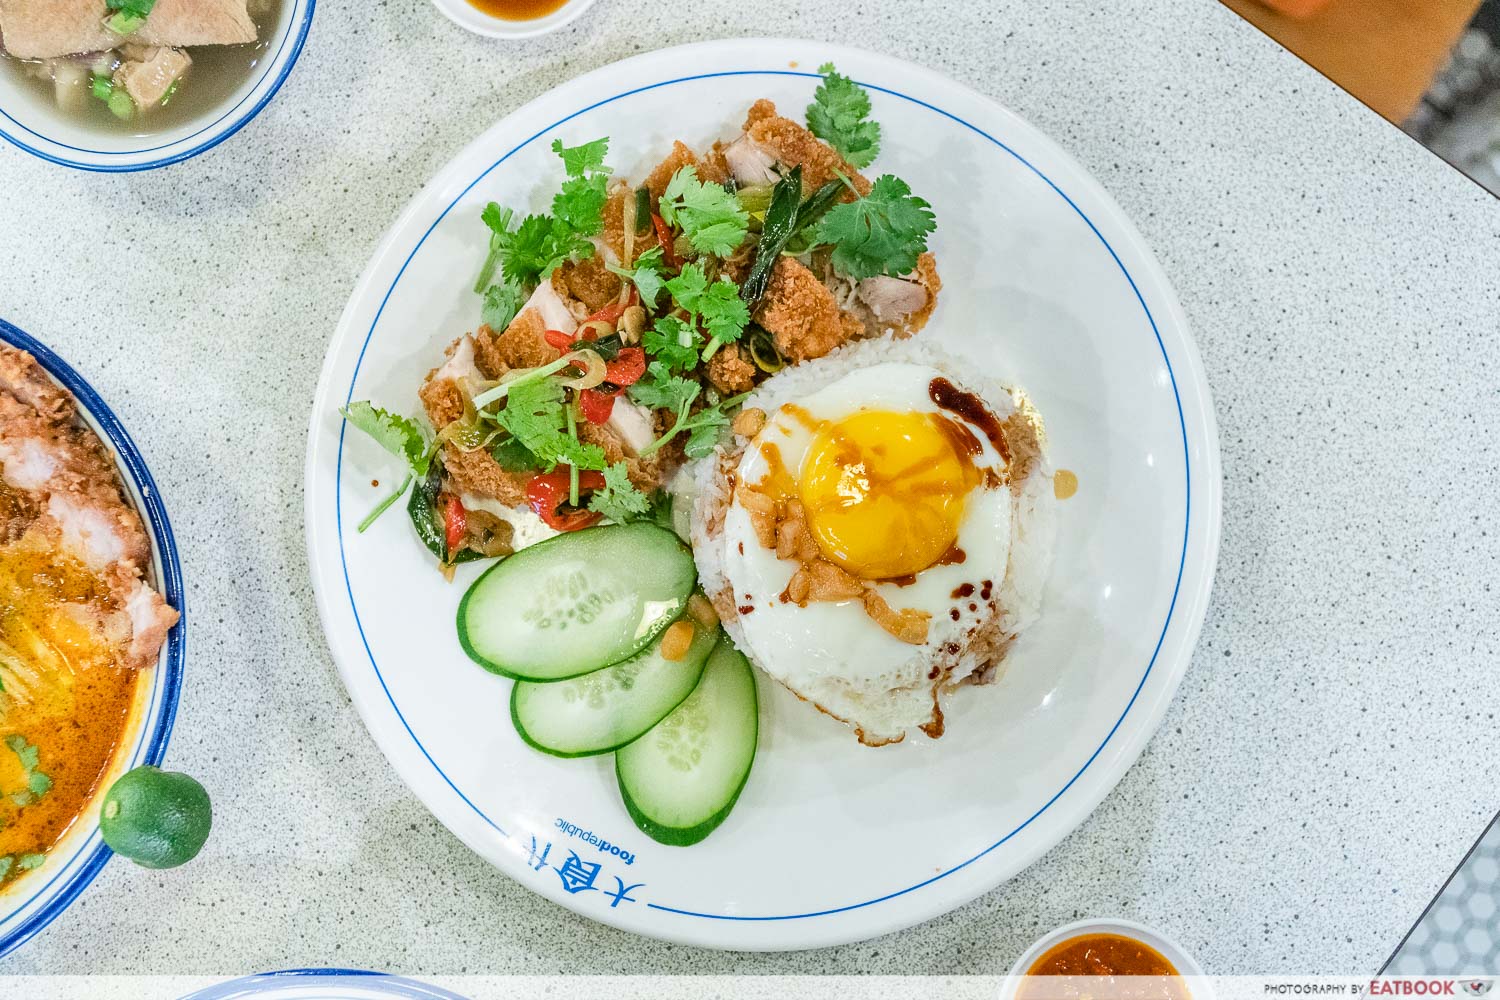 Ah Yen Traditional Fried Pork - Salt And Pepper Chicken Rice With Egg